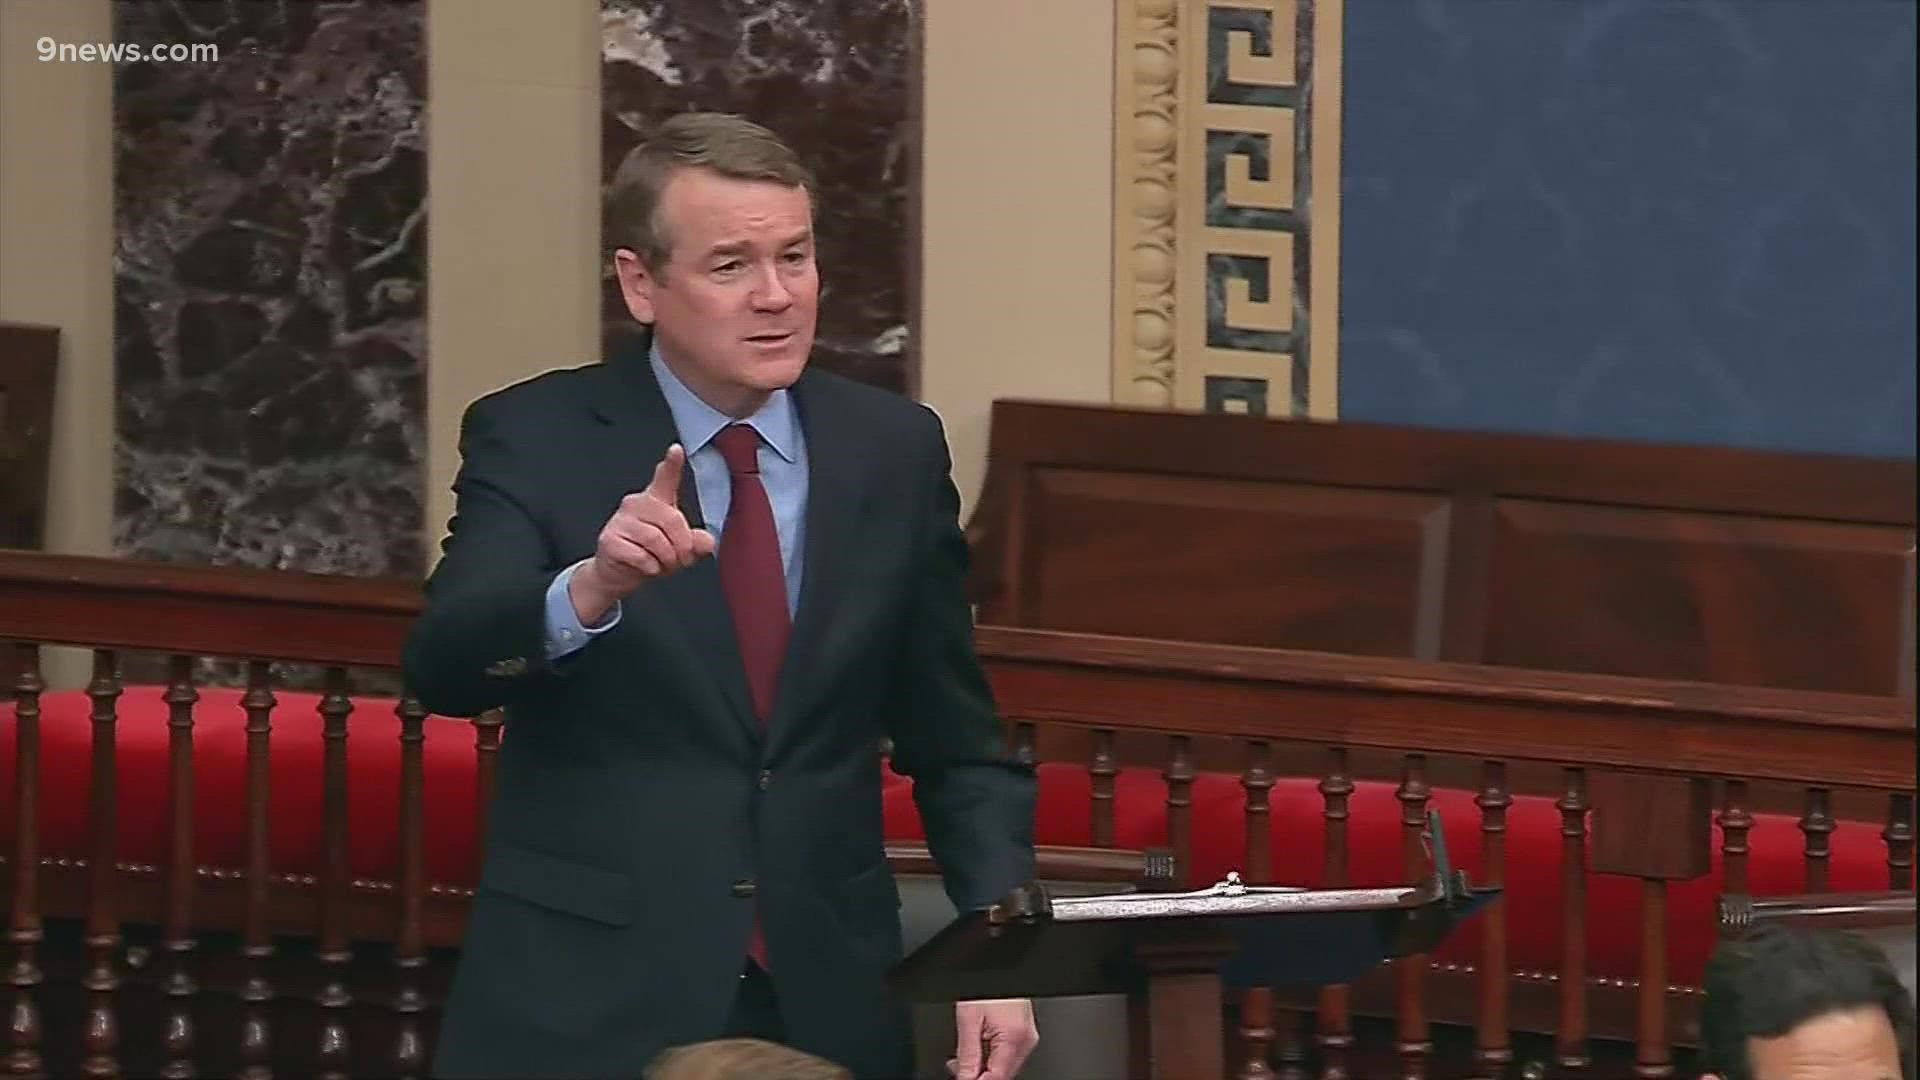 Democratic Colorado Sen. Michael Bennet urged his colleagues to pass voting rights legislation to make all of America's voting more like his home state's.